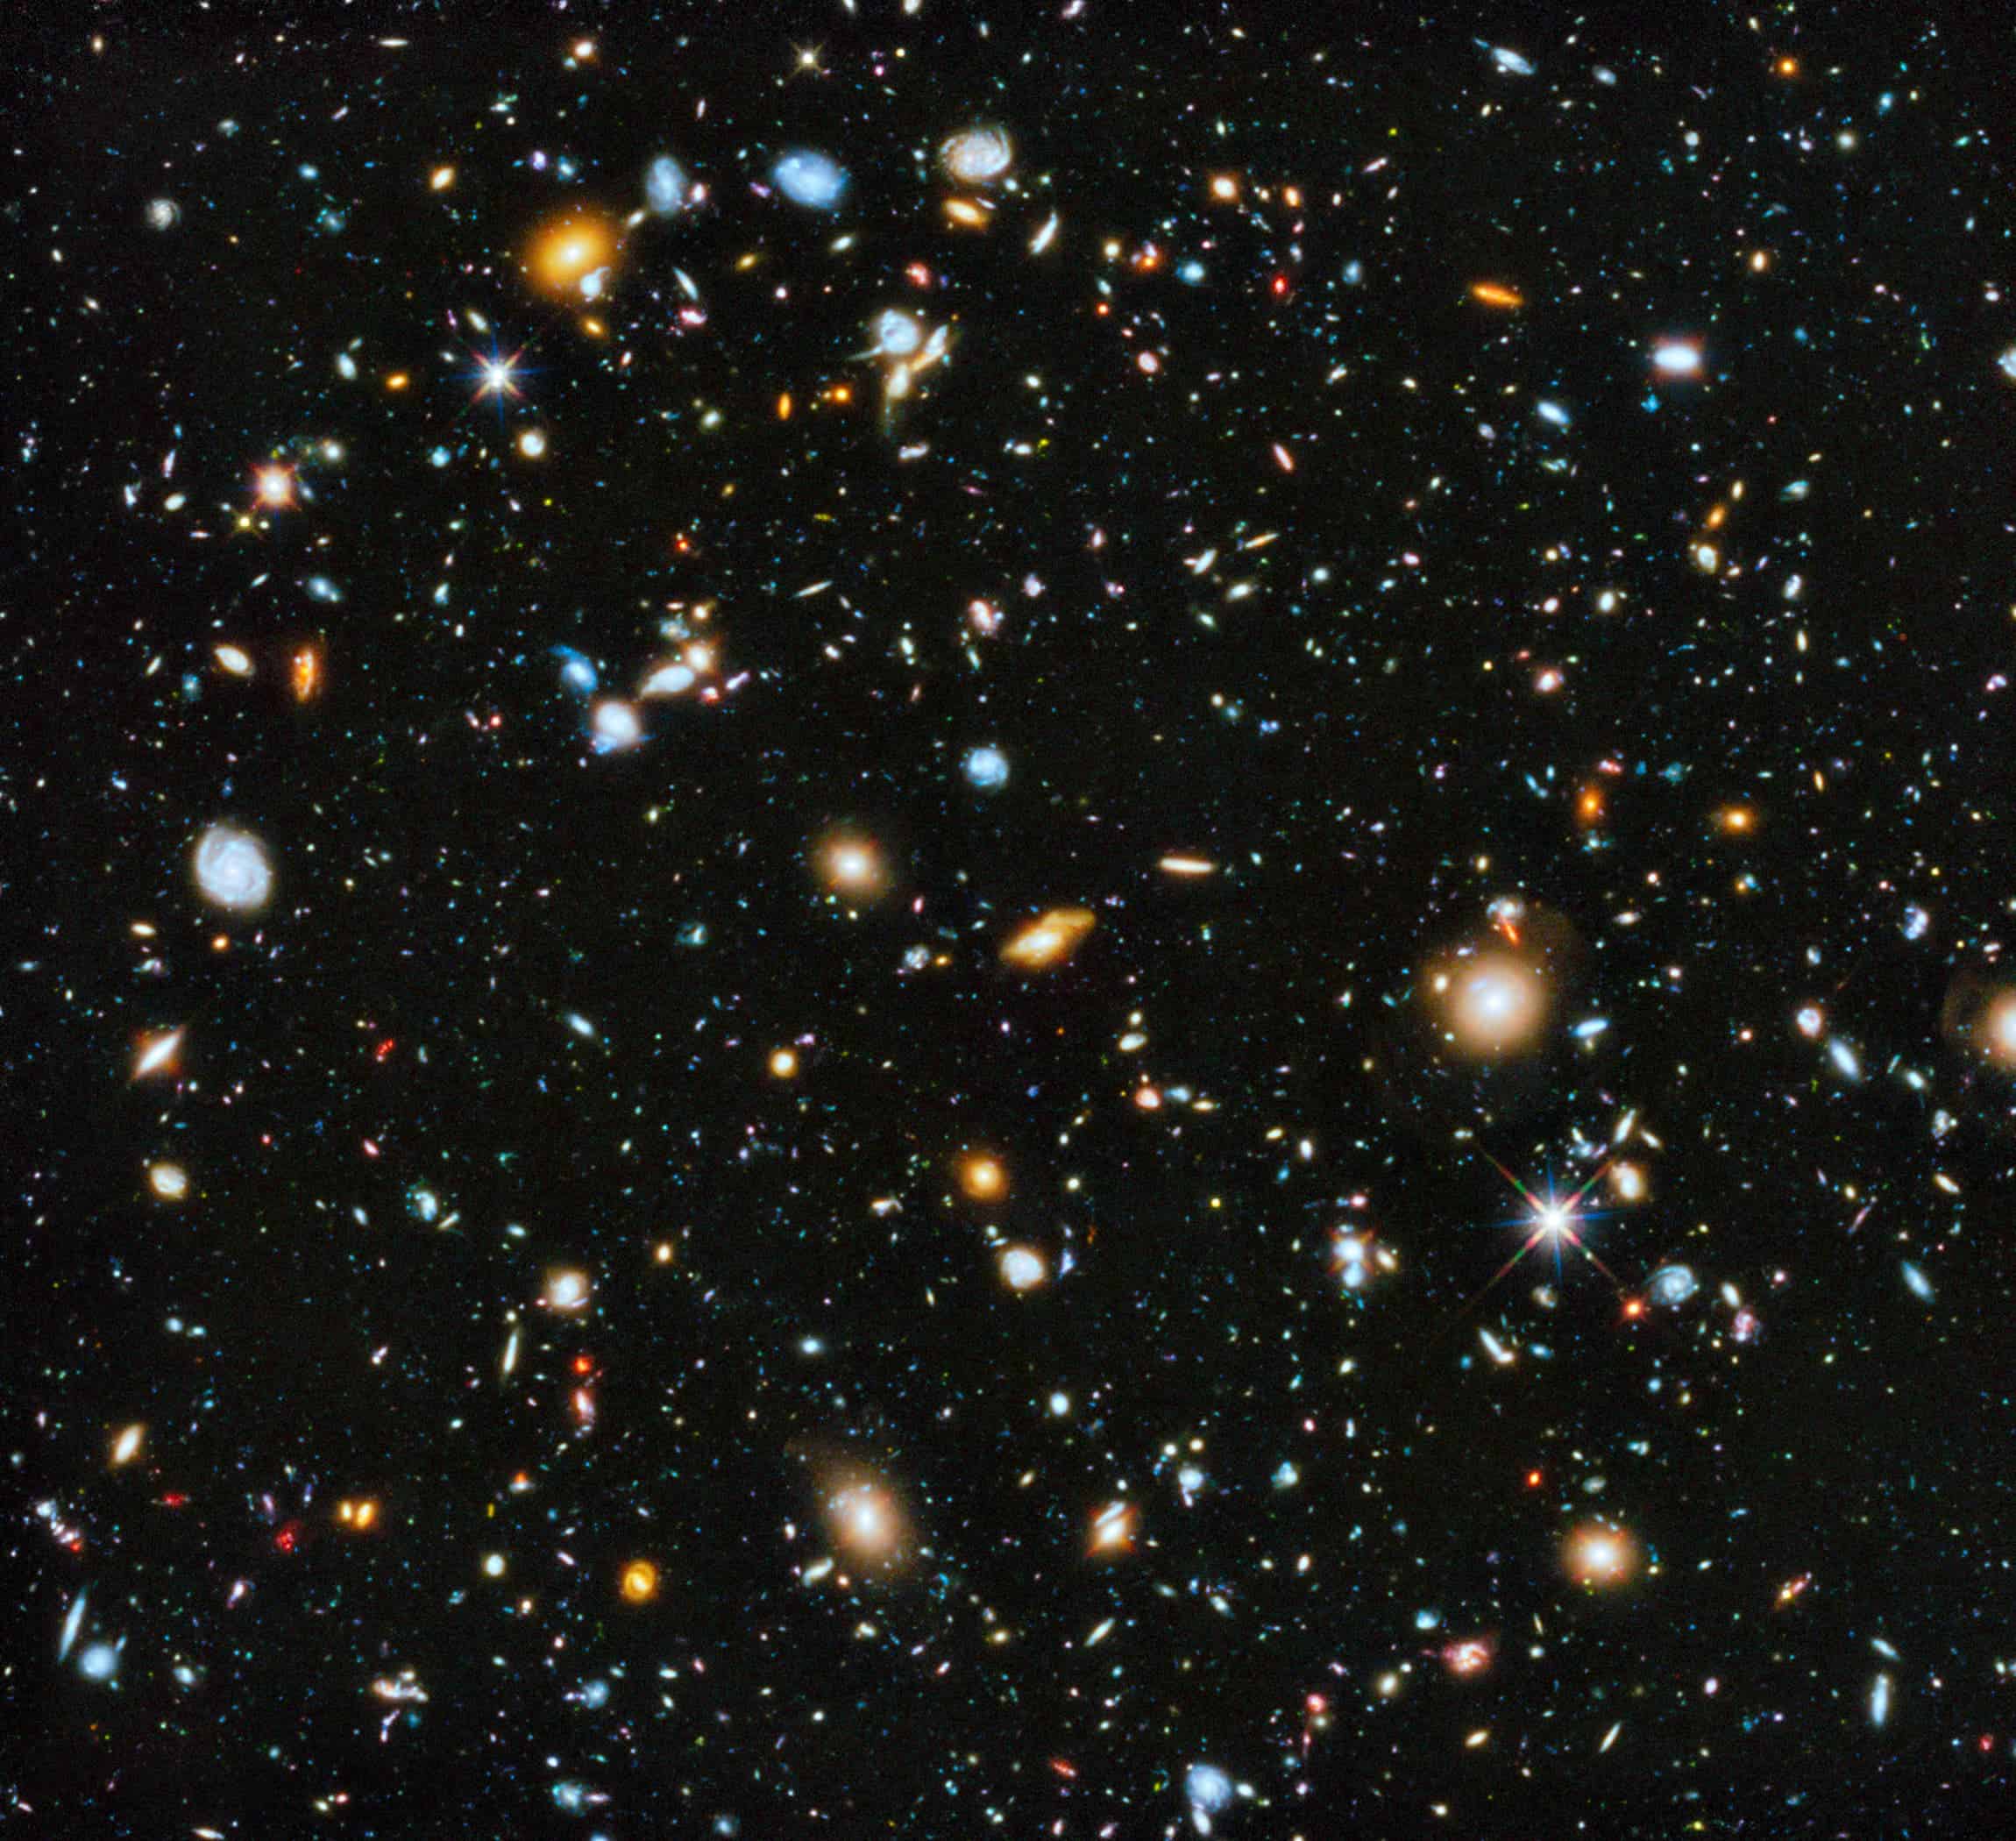 View of the universe by the Hubble Space Telescope. Credit: NASA.